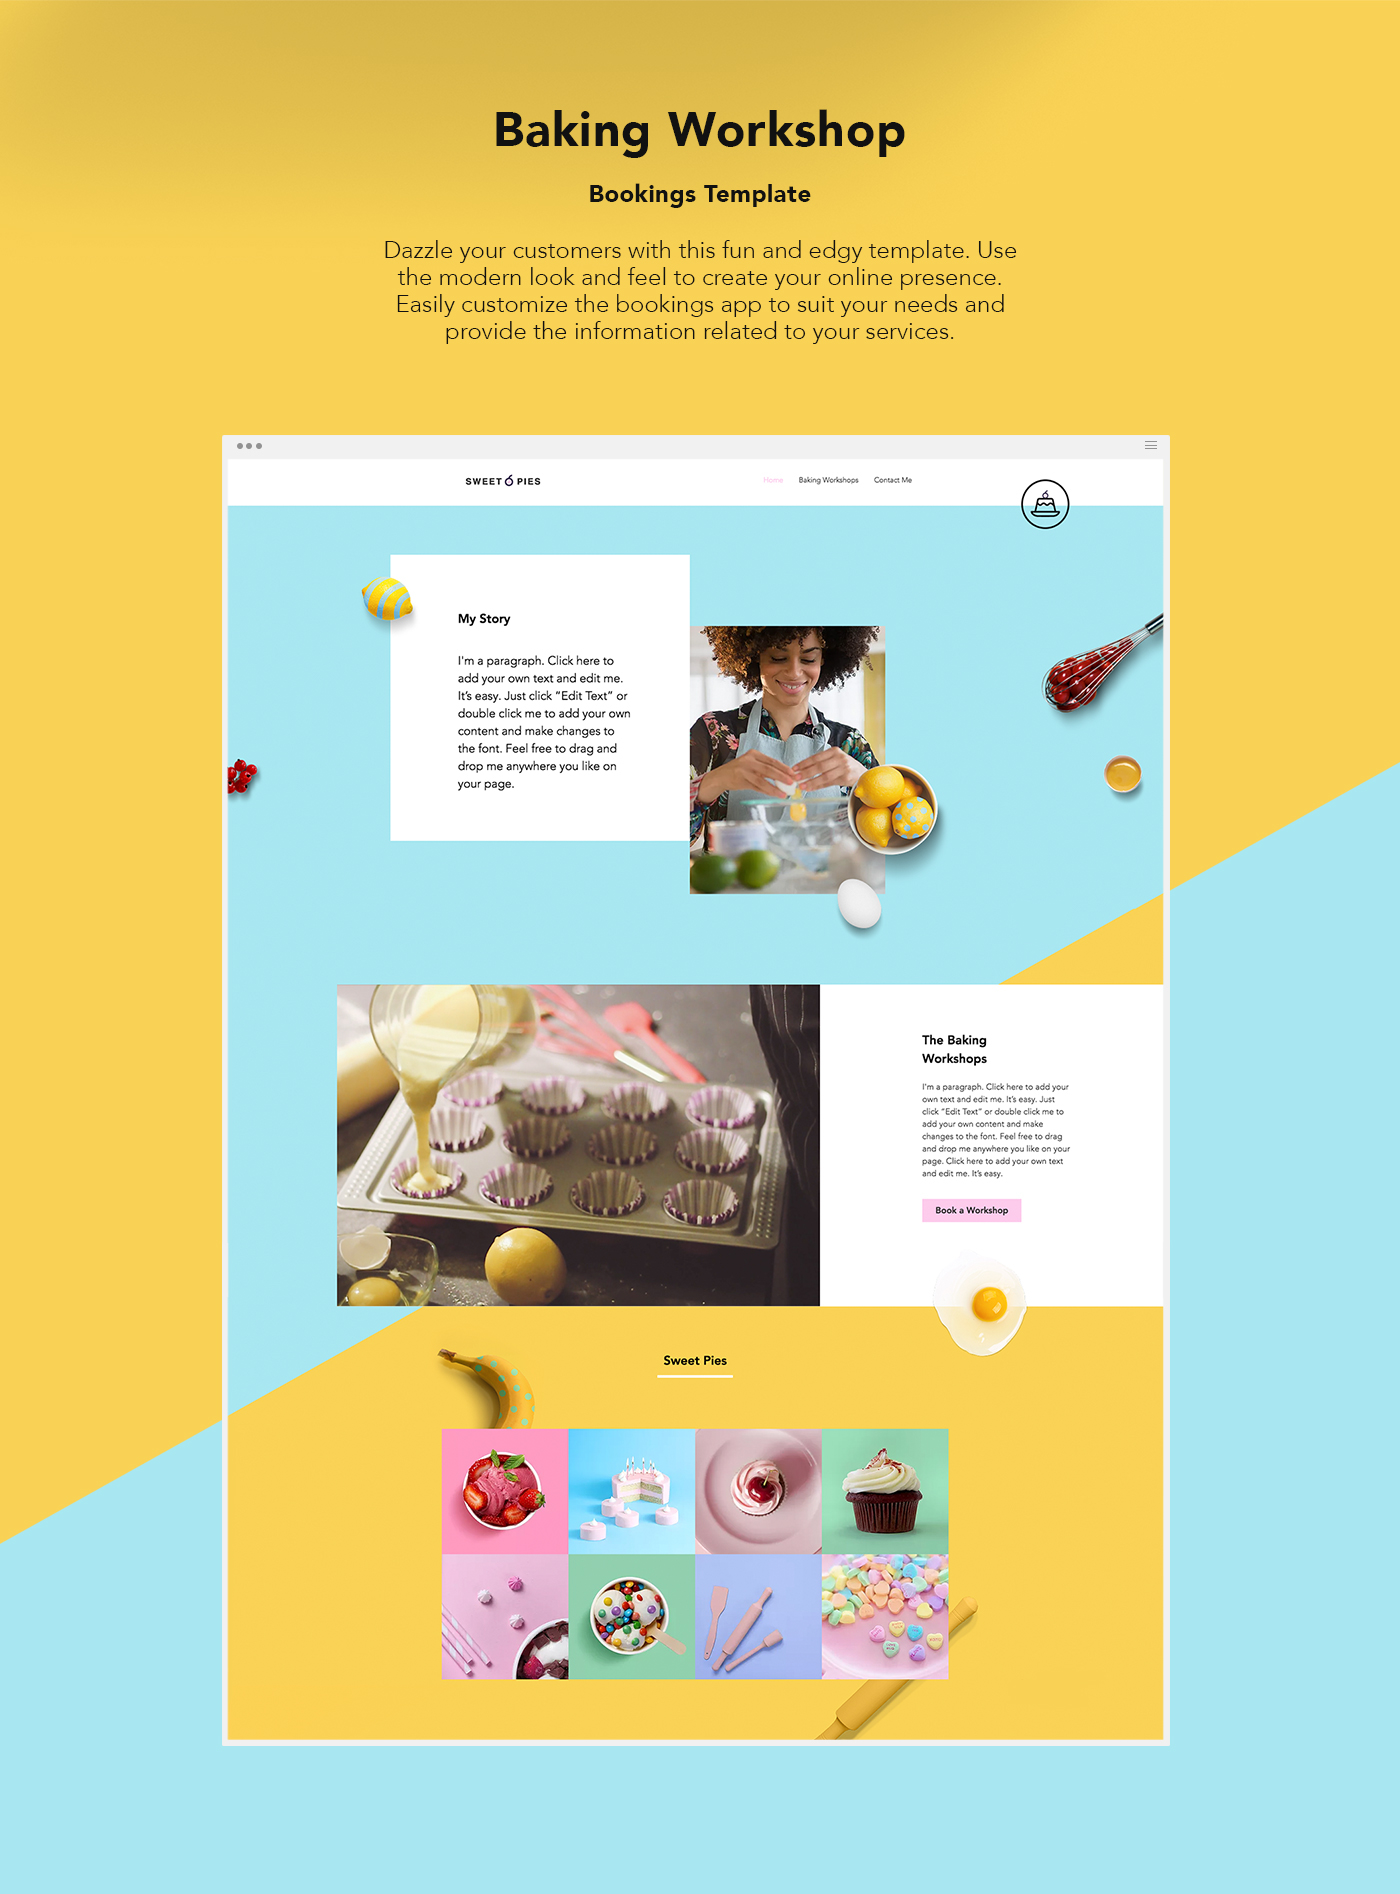 baking Booking Template sweet pies wix.com template pies